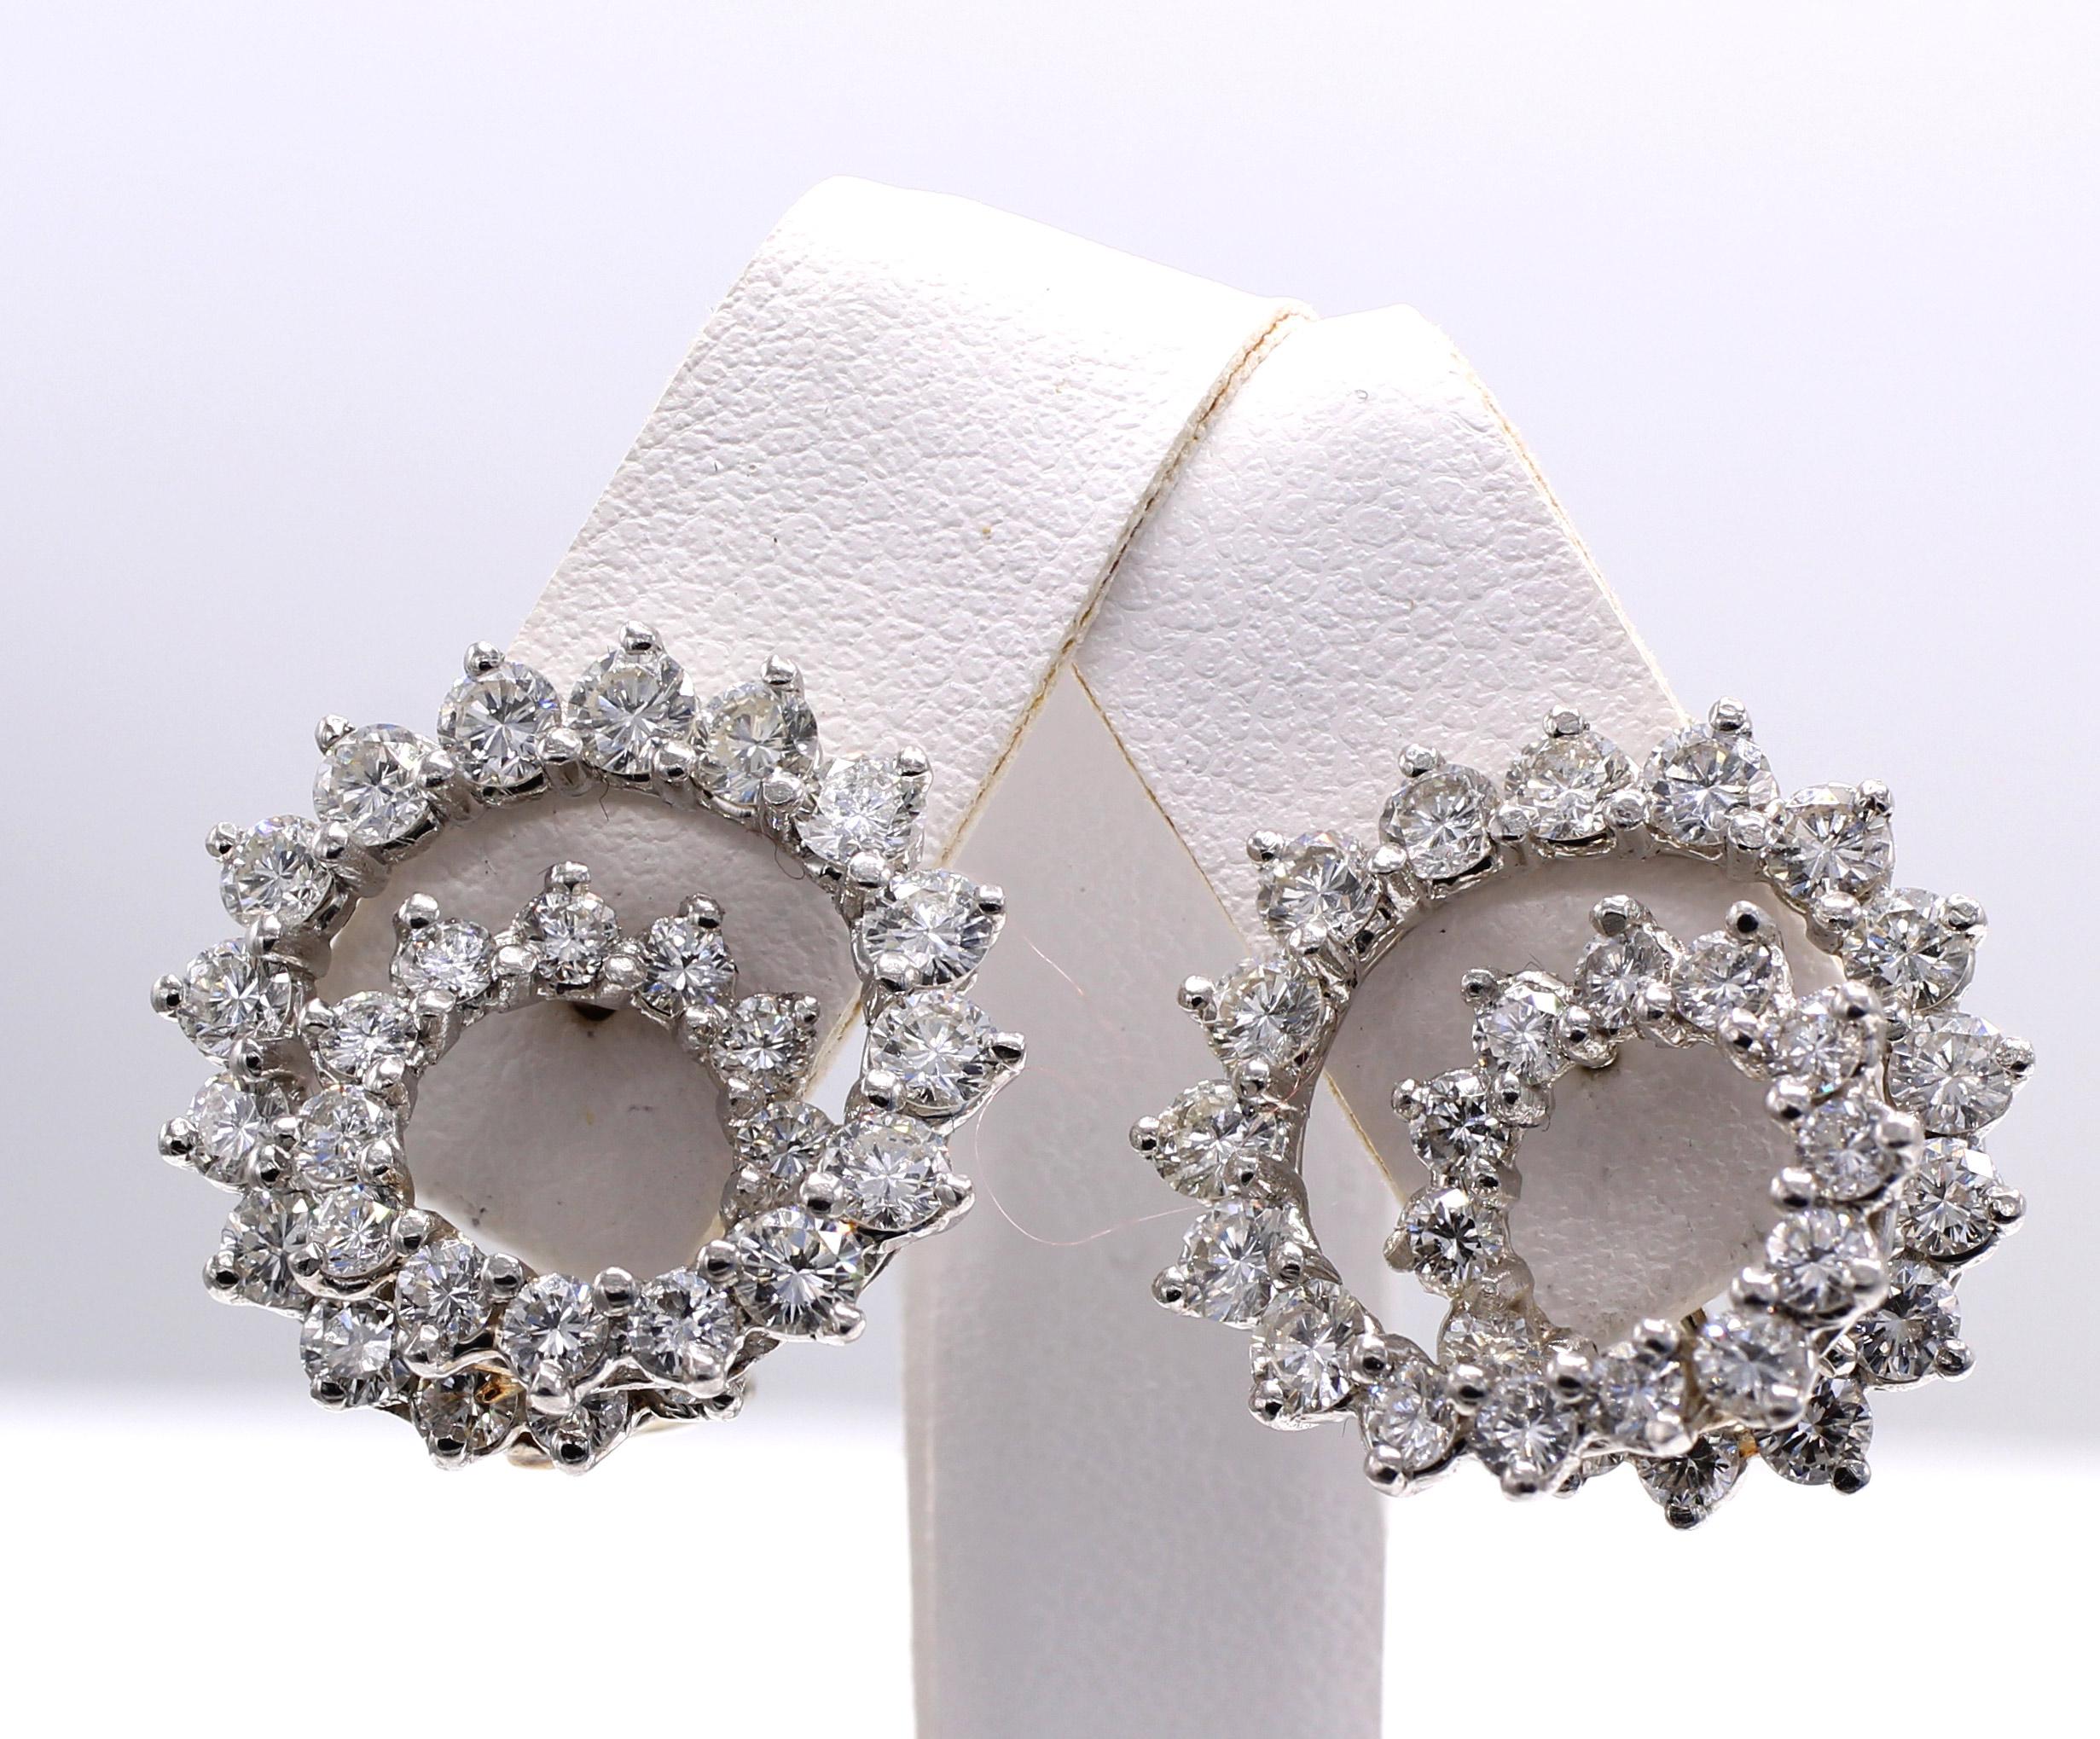 Iconic Swirl or Spiral design ear clips finely handcrafted in platinum. The interesting and three dimensional design spiraling outward from the earlobe gives each of the 56 bright white round brilliant cut diamonds extra sparkle and an amazing